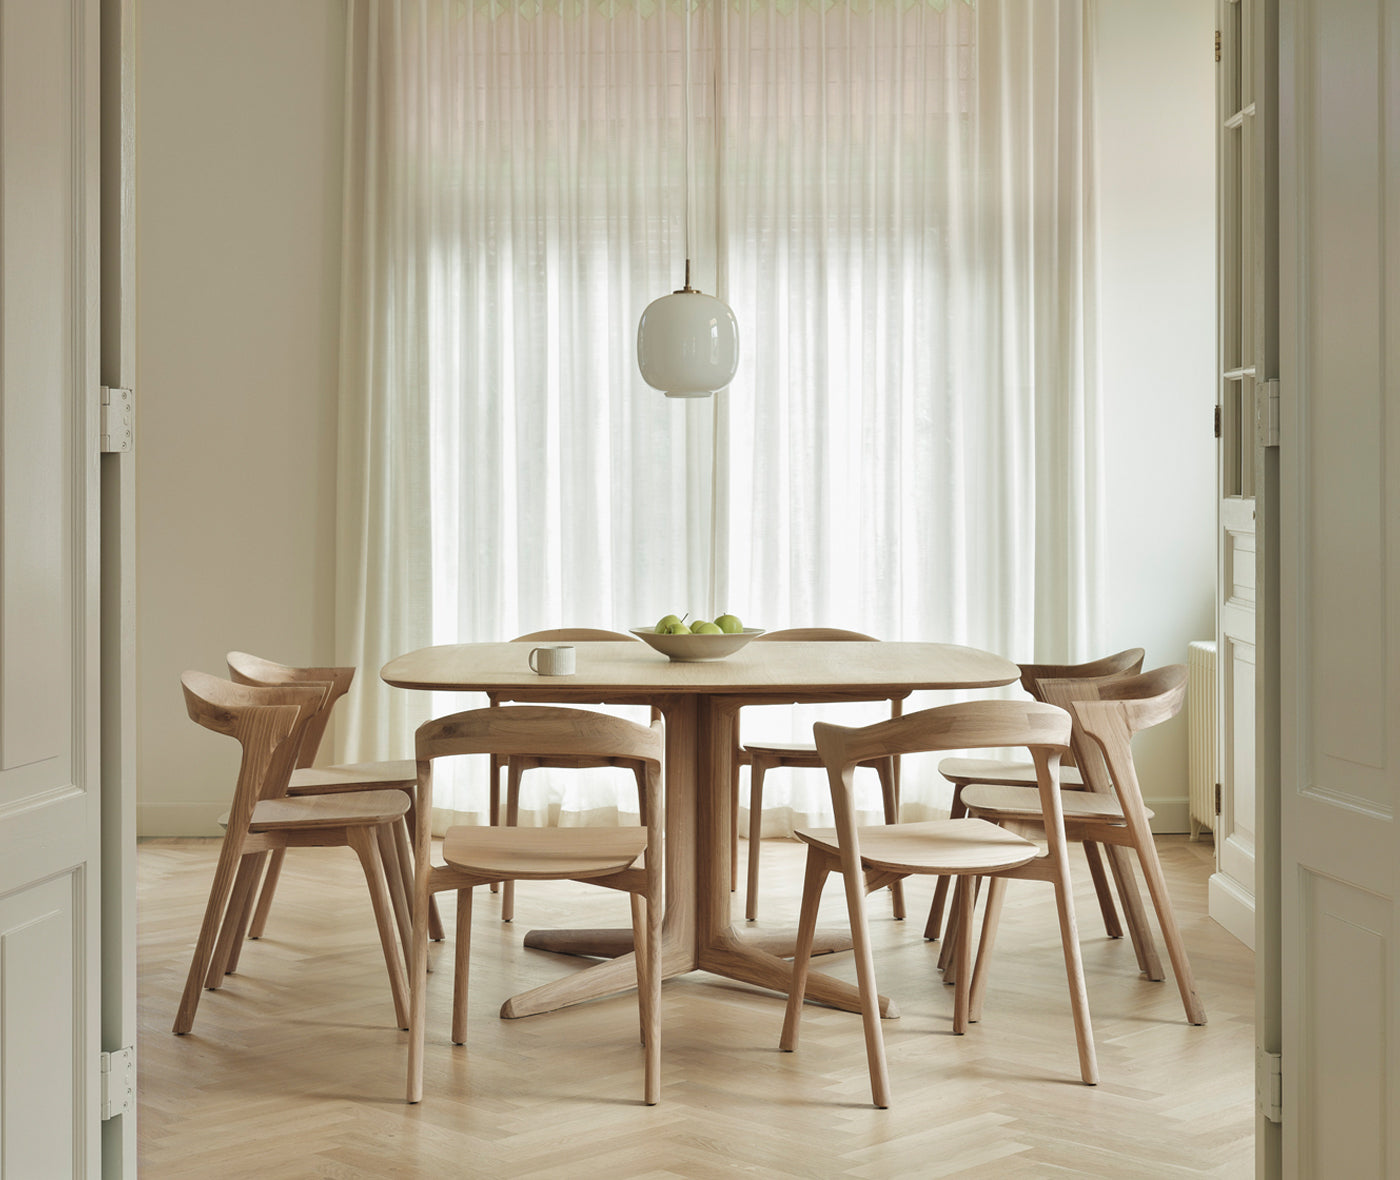 Corto Square Dining Table - More Options